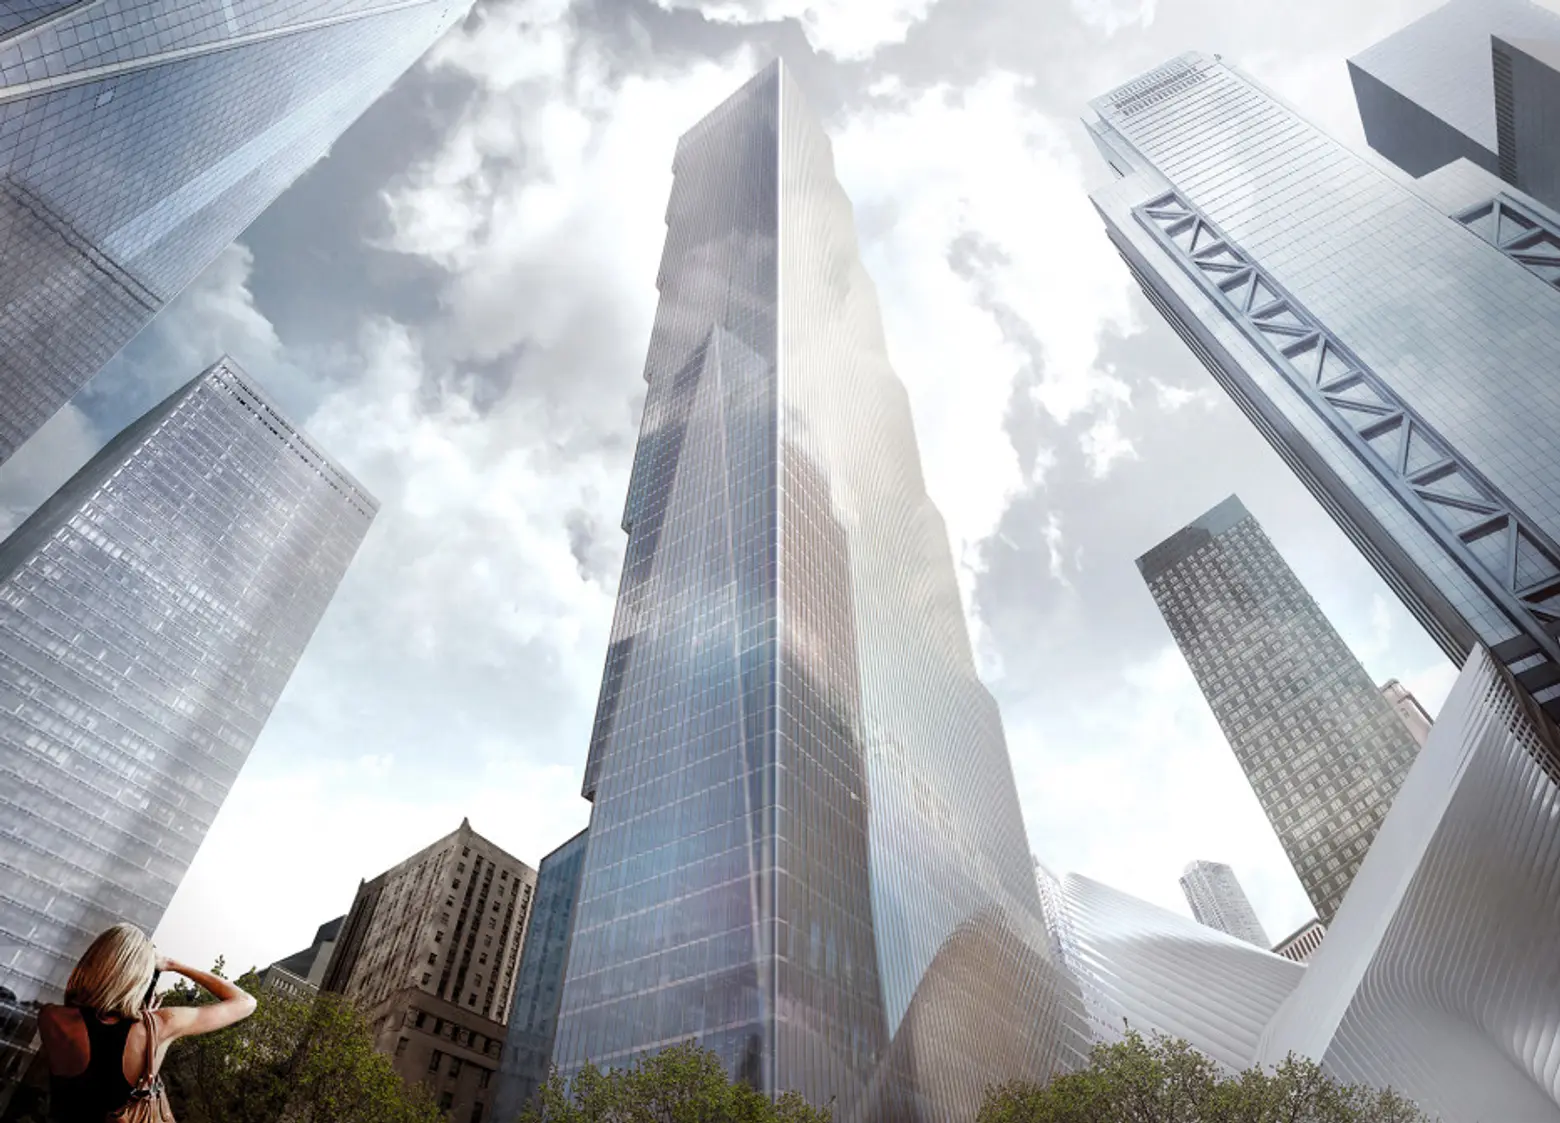 Bjarke Ingels-designed 2 WTC may move forward without anchor tenant